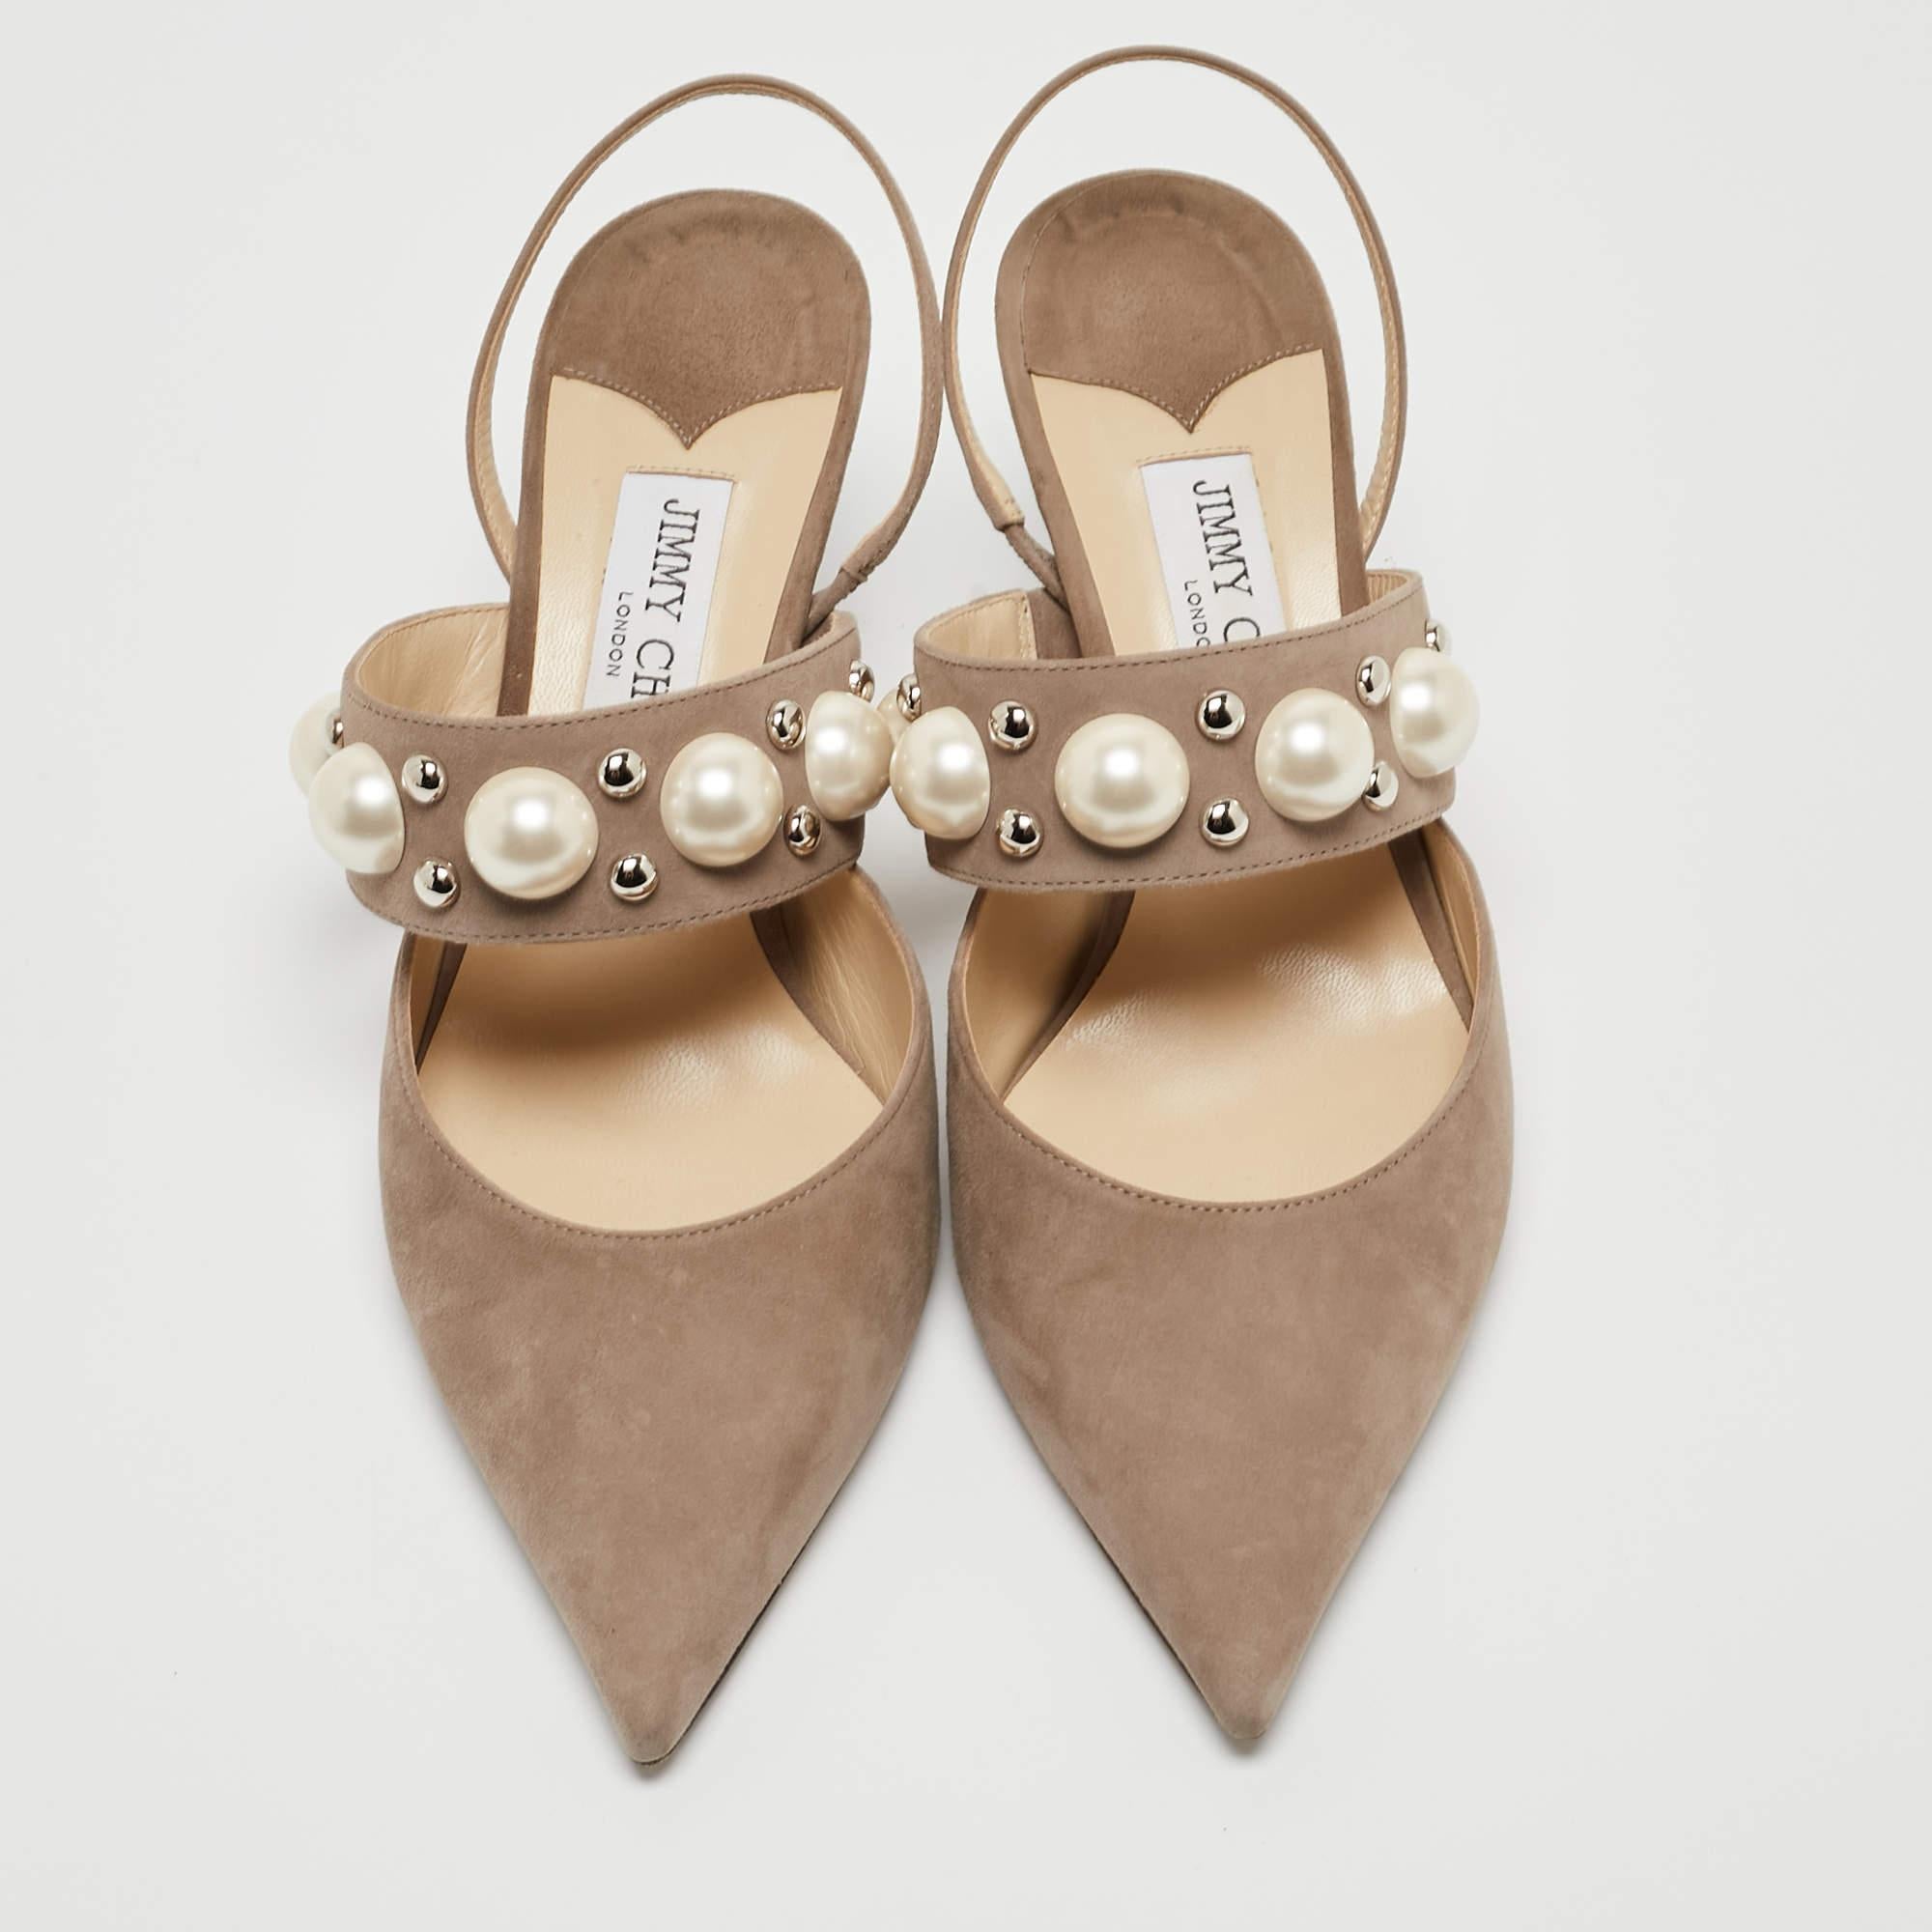 Wonderfully crafted shoes added with notable elements to fit well and pair perfectly with all your plans. Make these Jimmy Choo pumps yours today!

